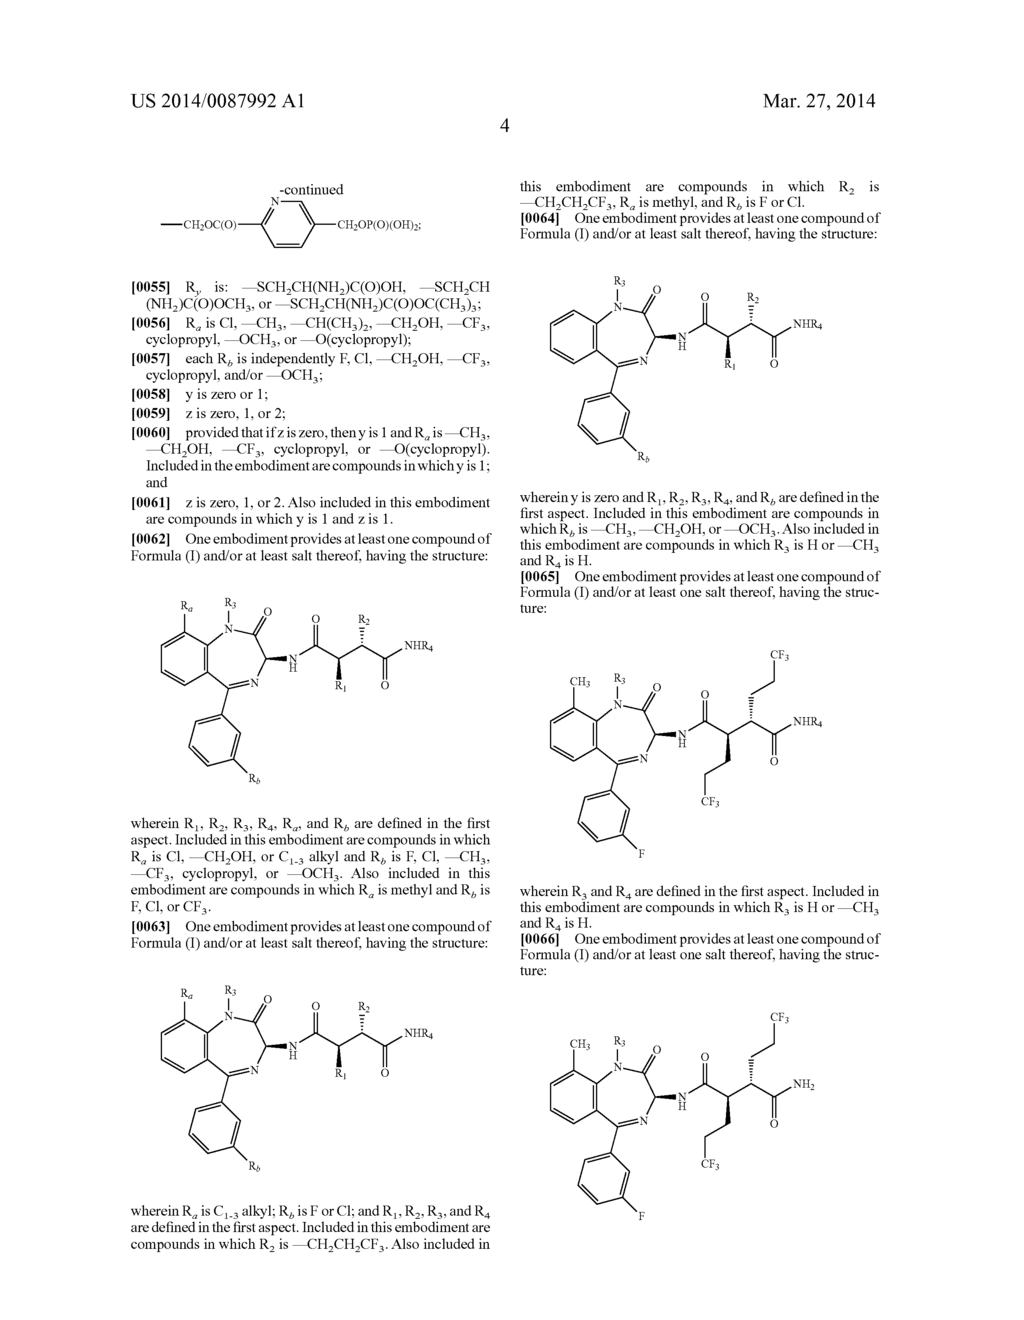 BIS(FLUOROALKYL)-1,4-BENZODIAZEPINONE COMPOUNDS AND PRODRUGS THEREOF - diagram, schematic, and image 11